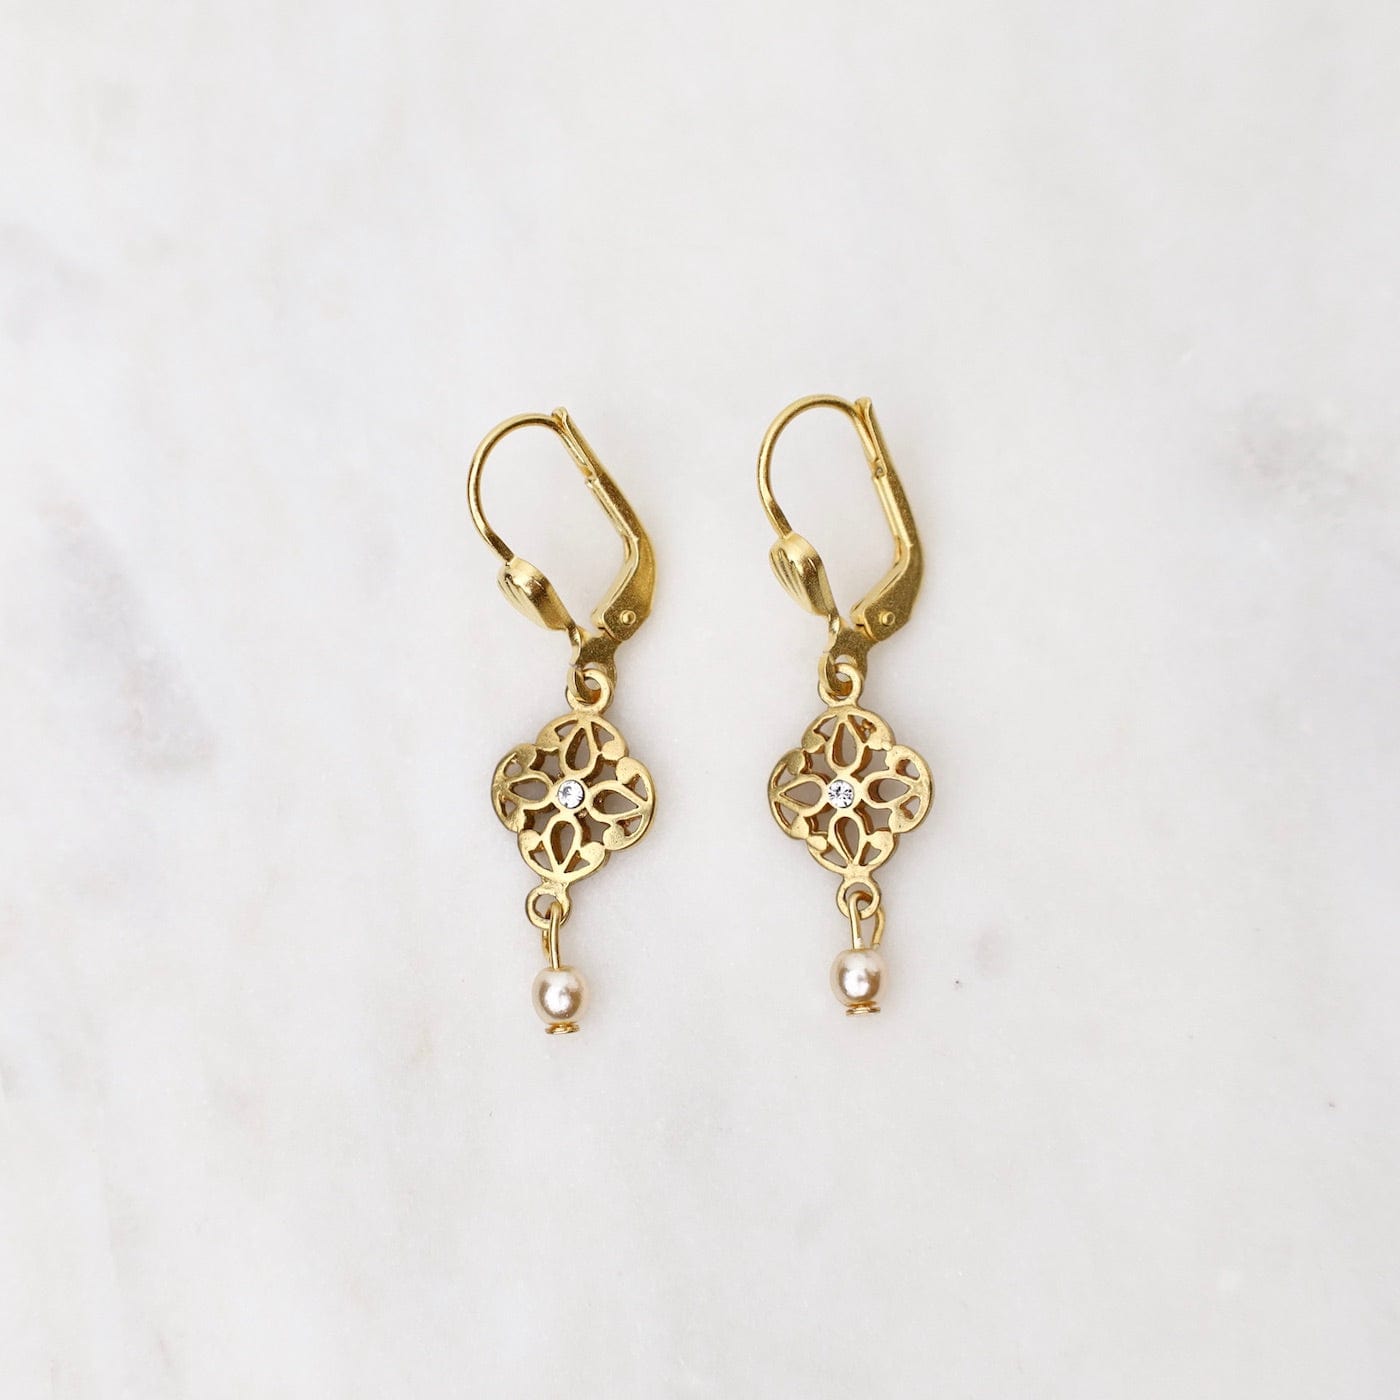 EAR-JM Gold Small Crystal Lotus Earrings with Pearl Drop